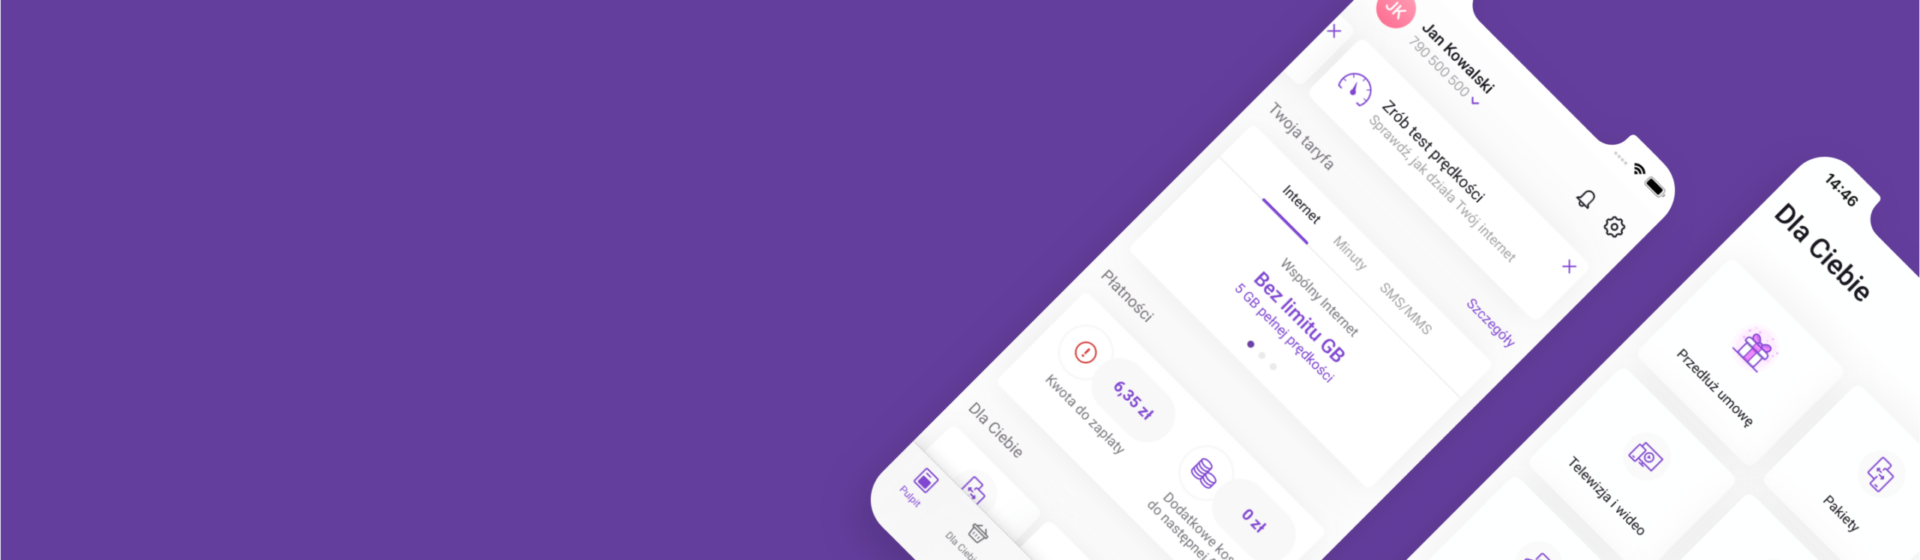 Interface of Play 24 - an account management app